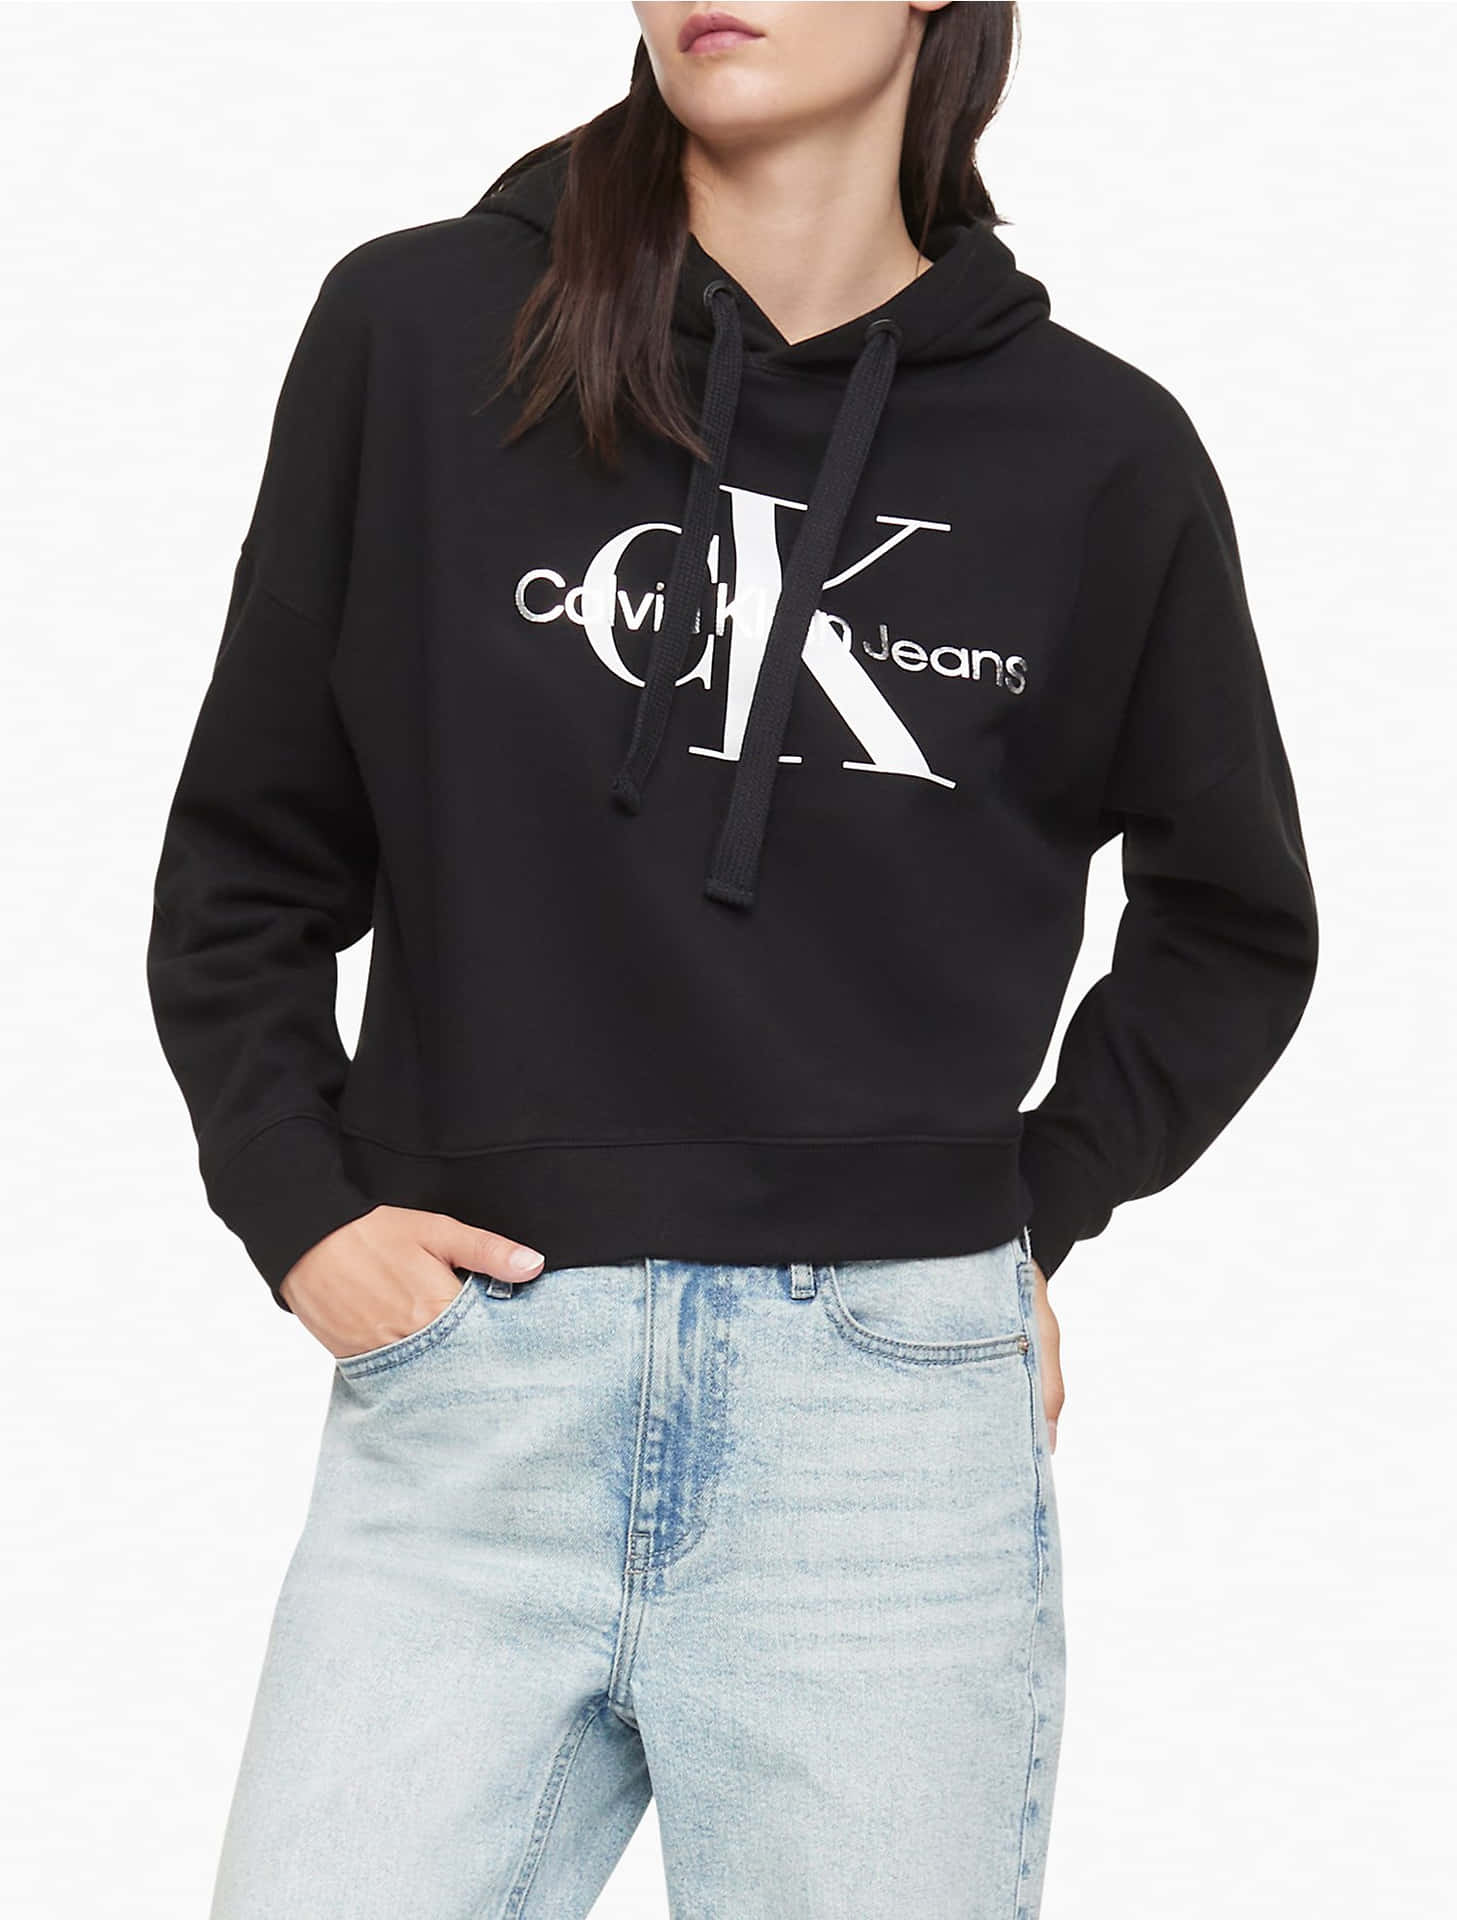 Discover the Diverse Expression of Calvin Klein